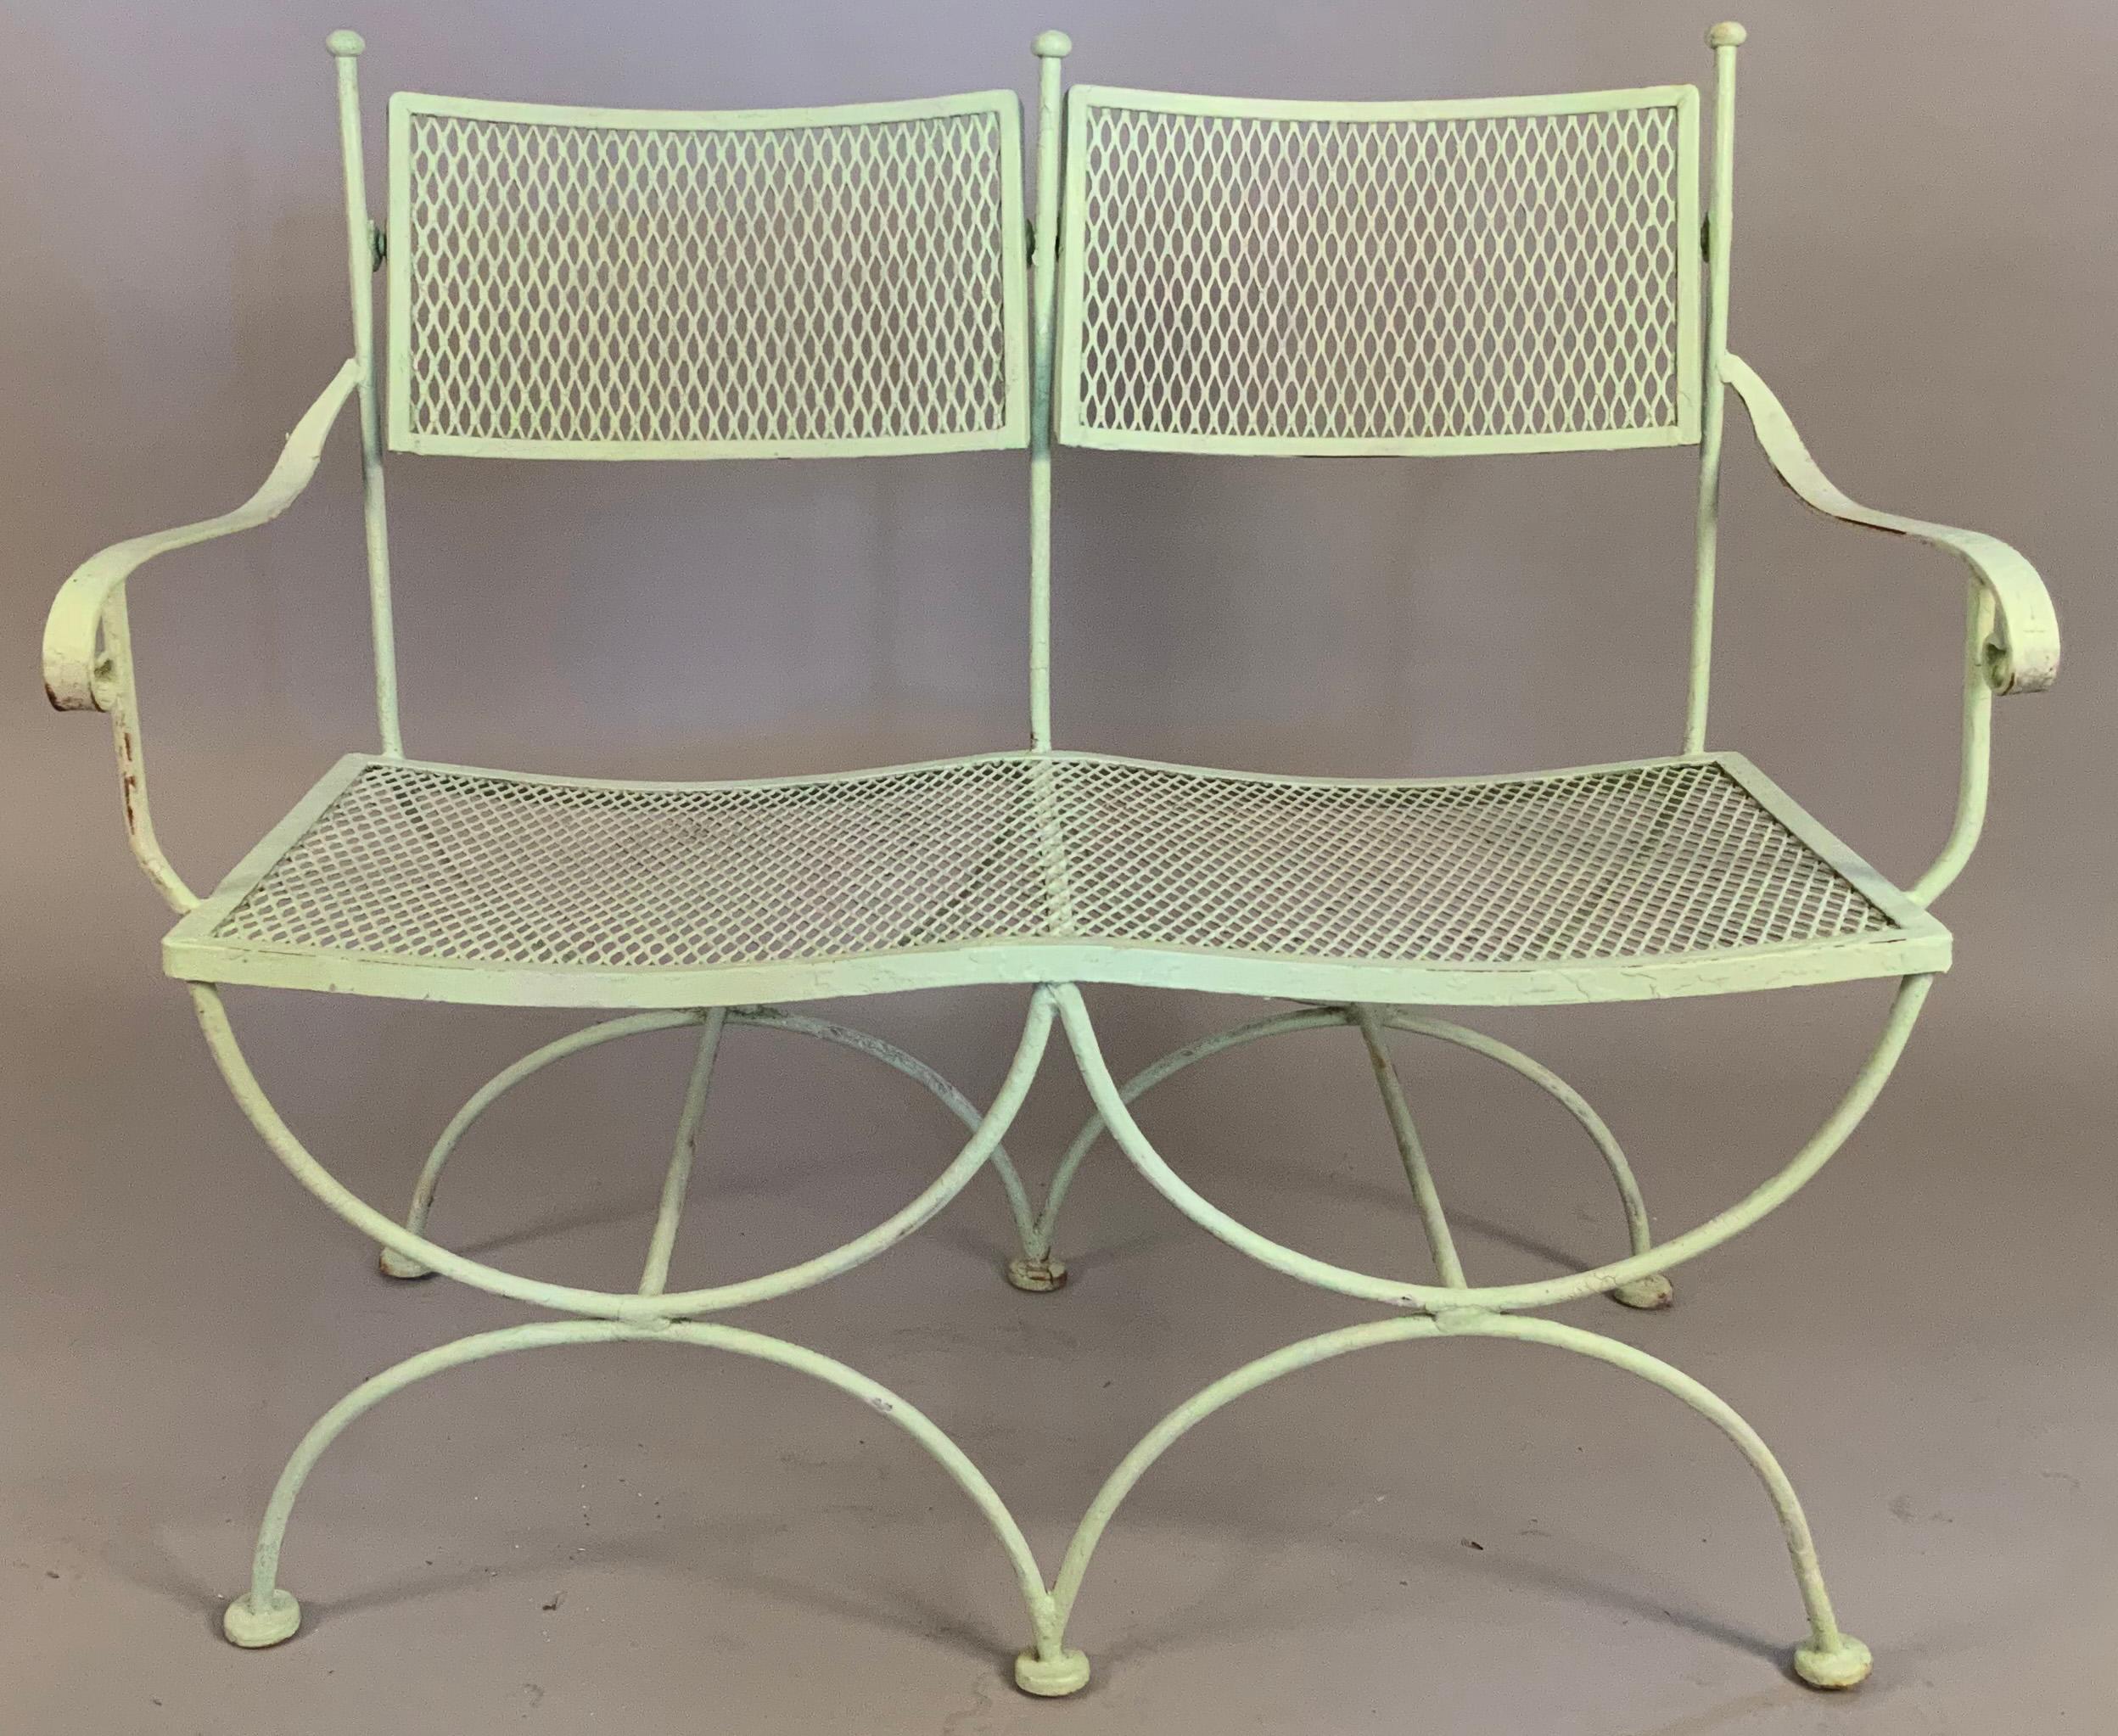 A pair of elegant vintage 1950's wrought iron benches with curule bases and articulated tilting seatbacks. Beautifully scaled with nice details, in their original pale mint green finish, with age expected wear.